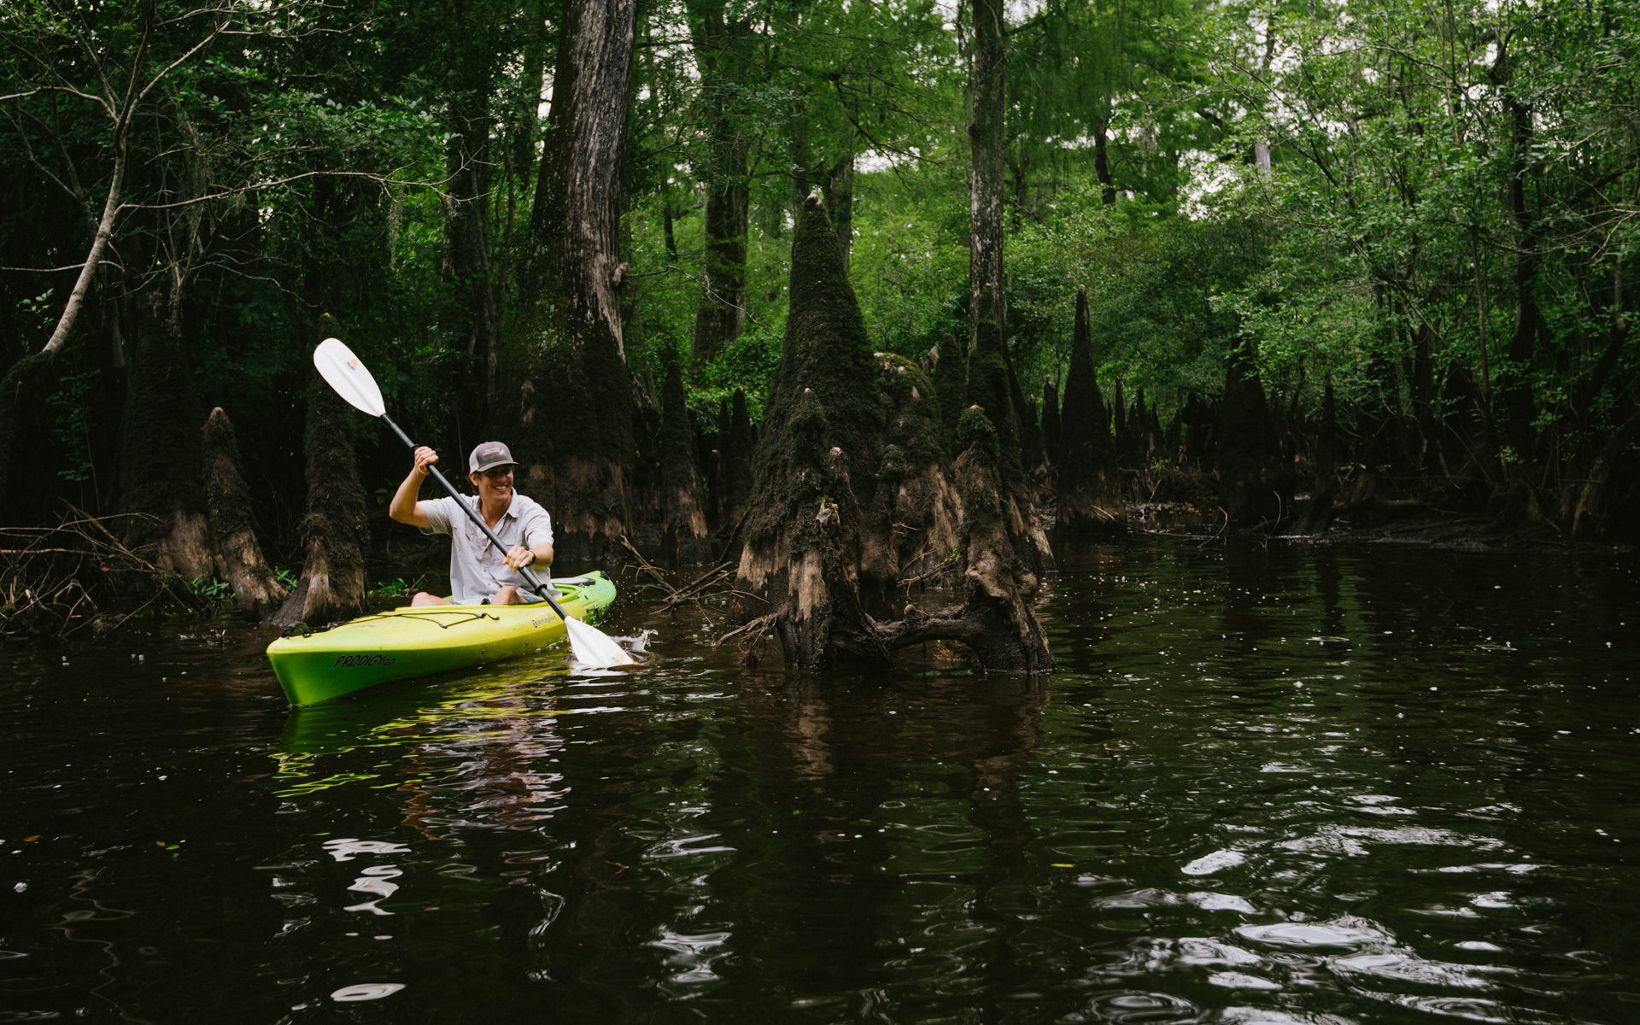 A kayaker navigates through the waters of the Black River surrounded by giant cypress trees.